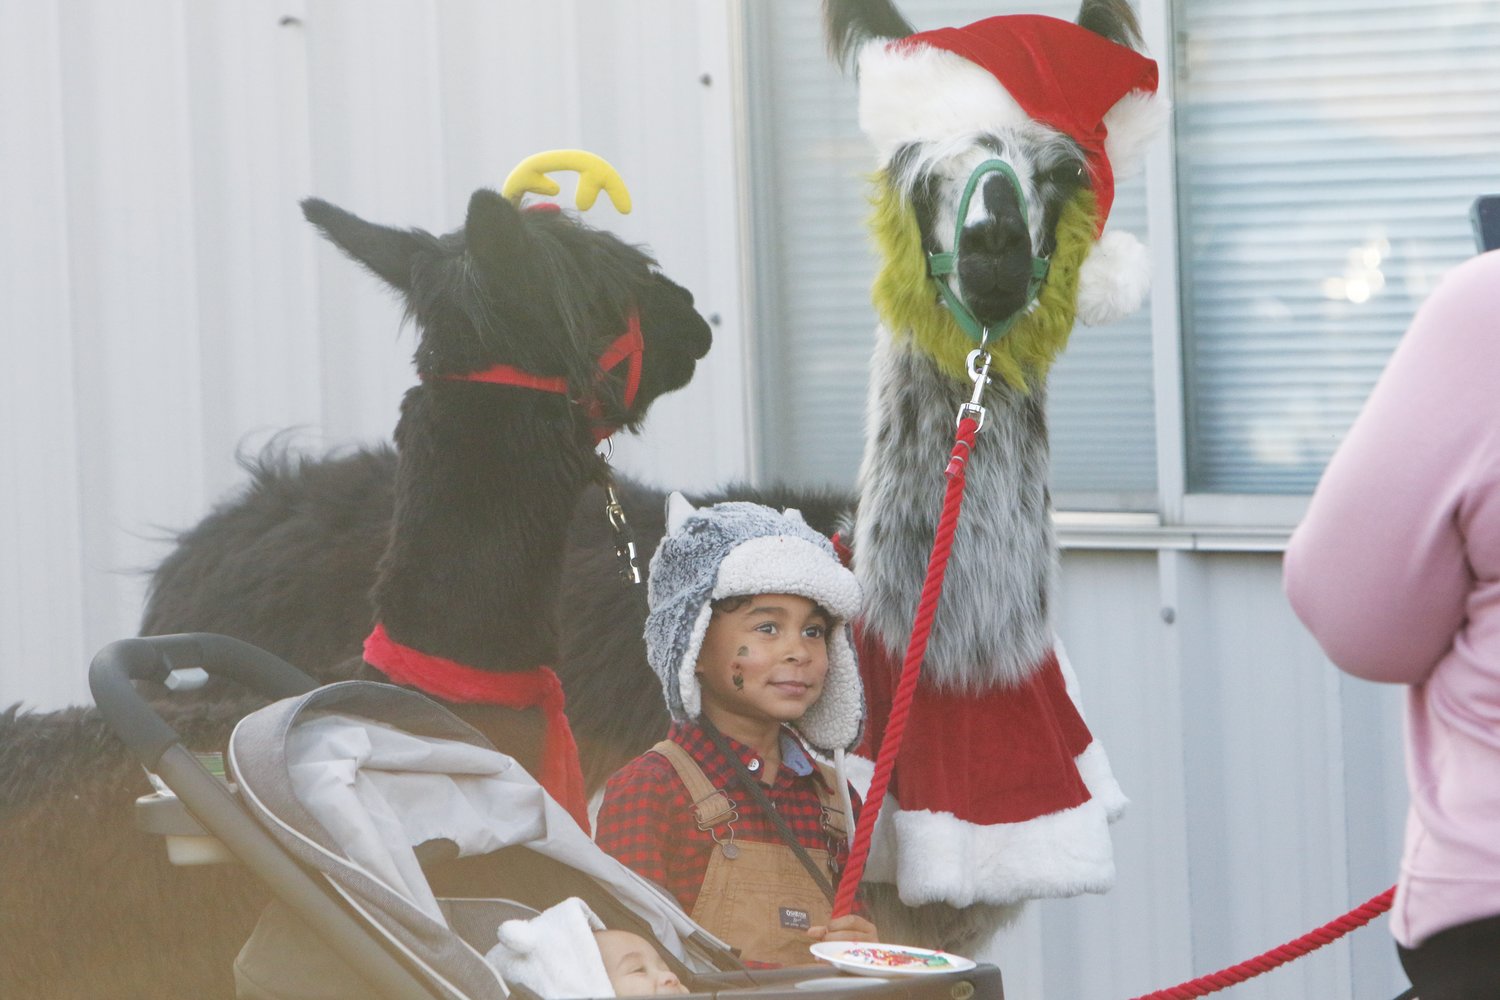 The Winter Fest in Lone Tree welcomed Christmas Llamas who were dressed for the holiday season.